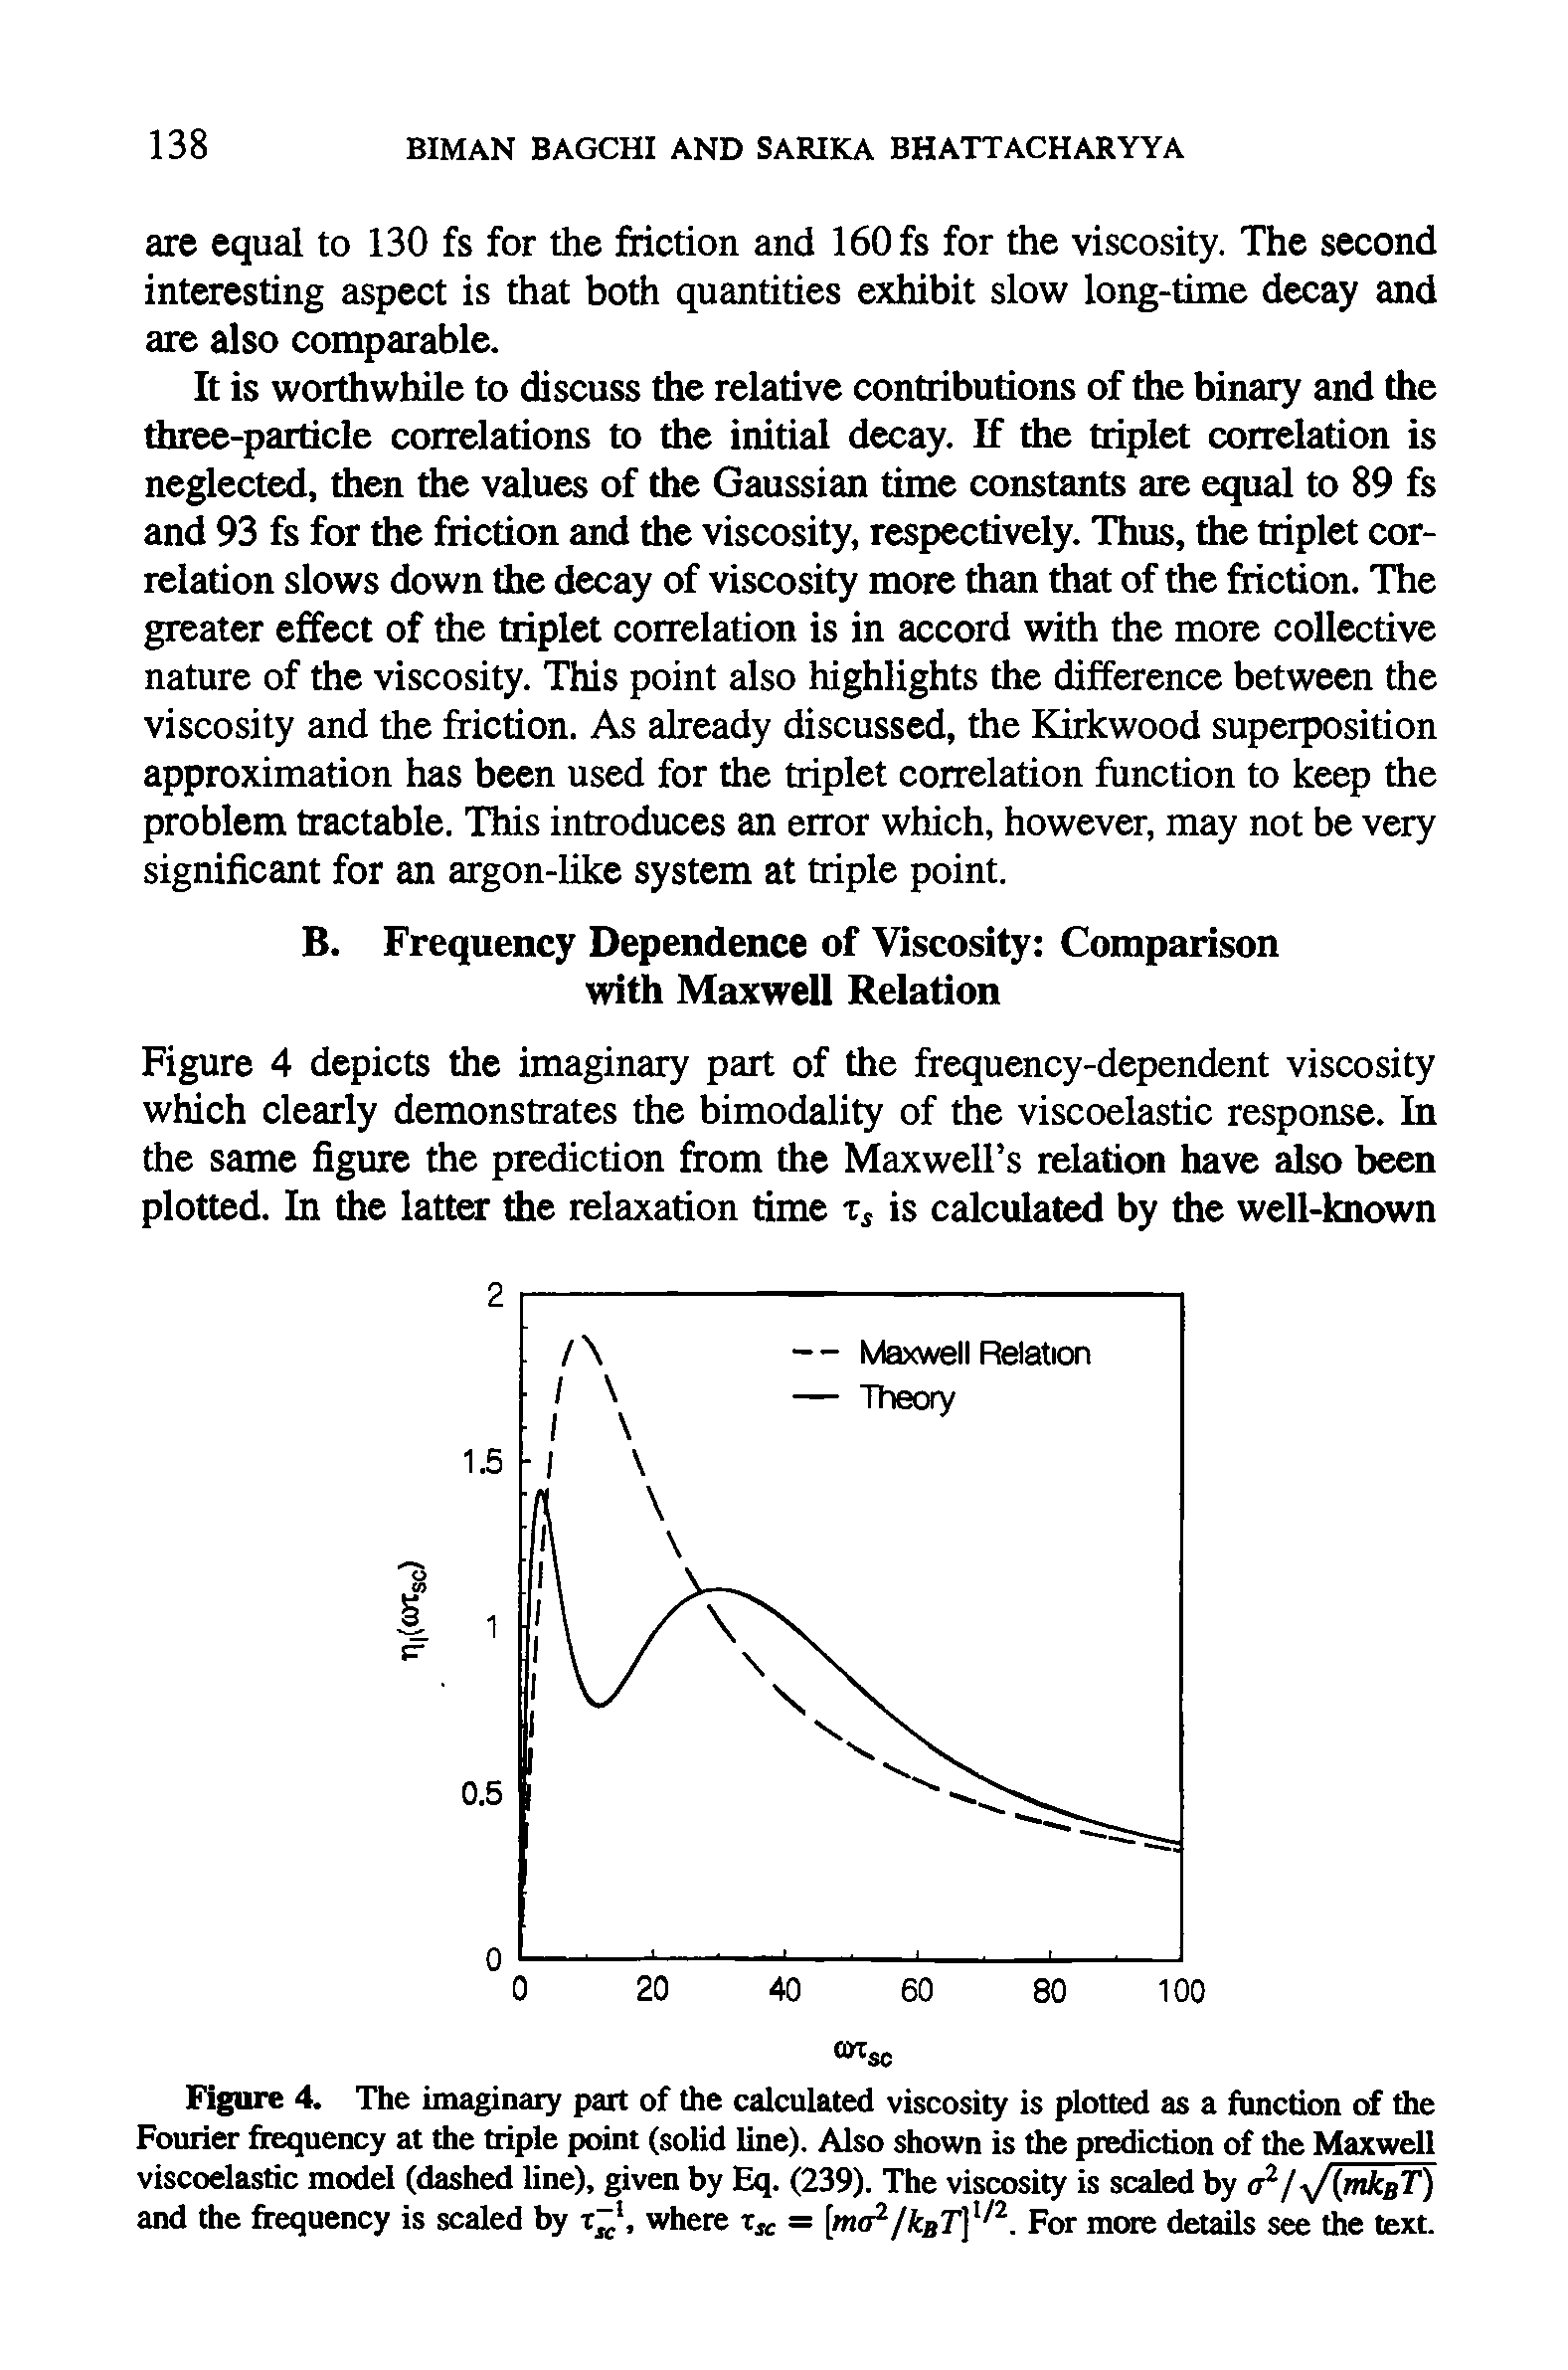 Figure 4. The imaginary part of the calculated viscosity is plotted as a function of the Fourier frequency at the triple point (solid line). Also shown is the prediction of the Maxwell viscoelastic model (dashed line), given by Eq. (239). The viscosity is scaled by a2/ /(mkBT) and the frequency is scaled by x l, where xsc = [ma2/kBT l/2. For more details see the text.